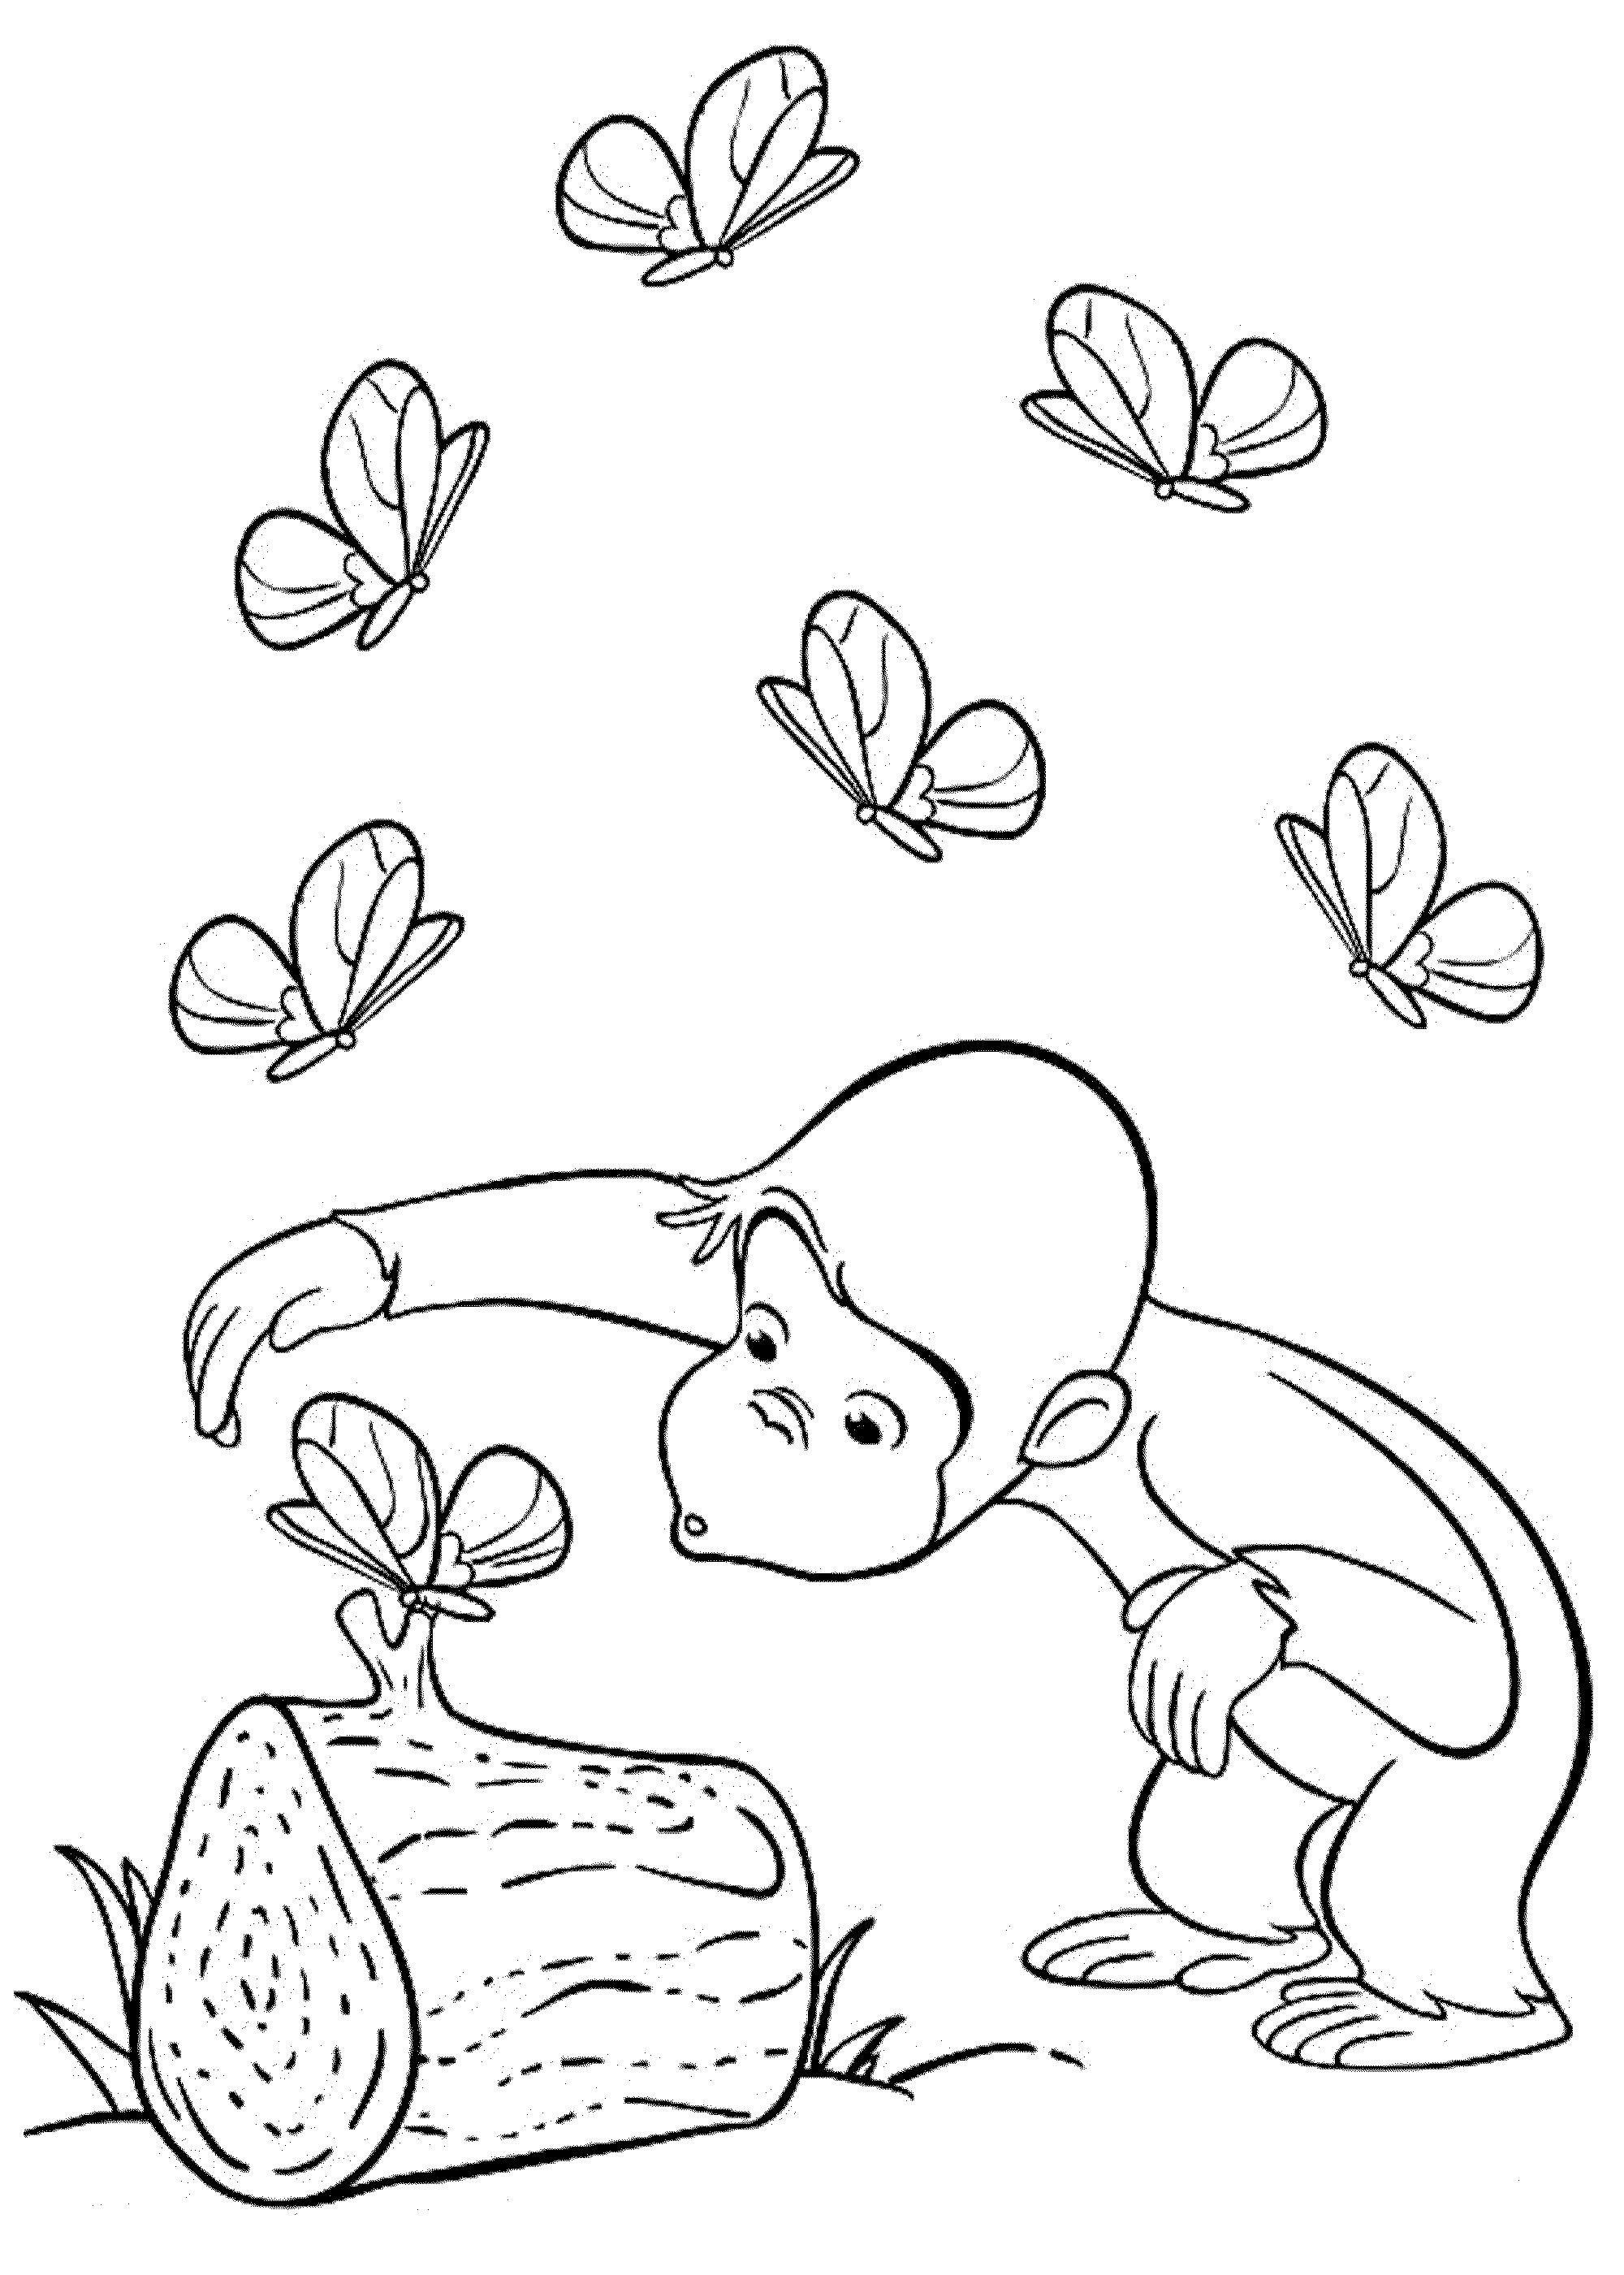 Curious George Coloring Page